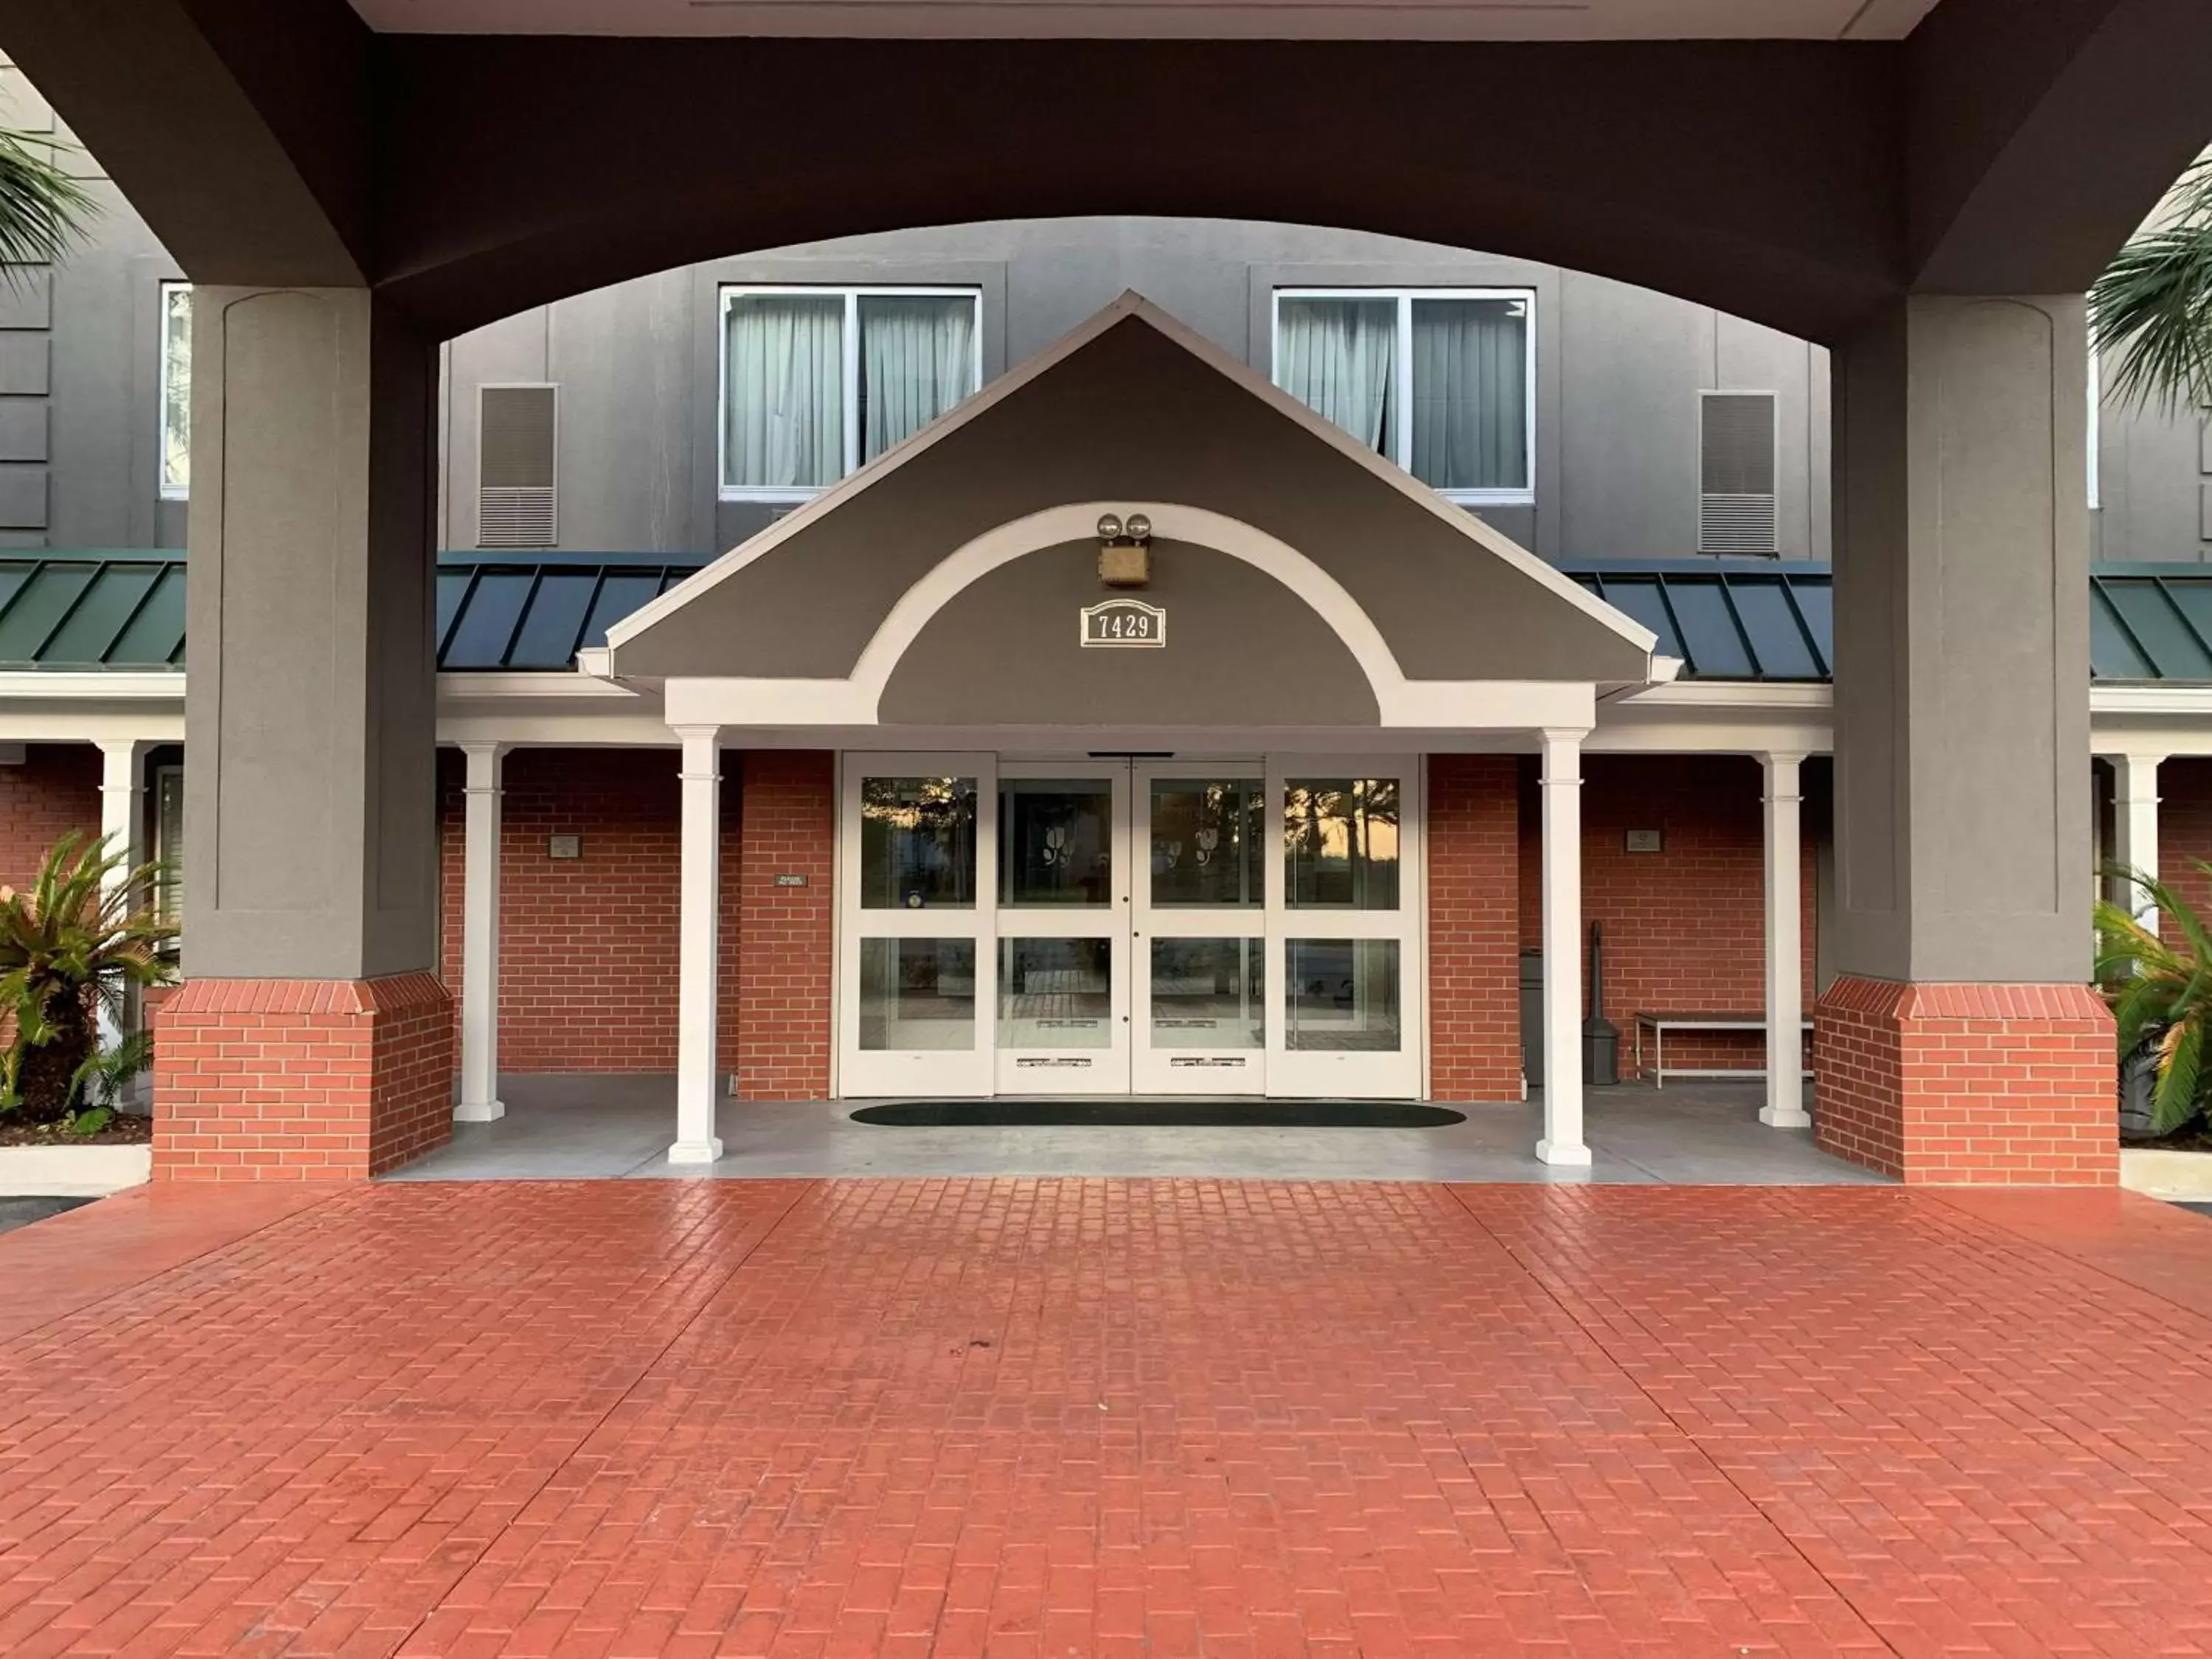 Property building in Country Inn & Suites by Radisson, Charleston North, SC